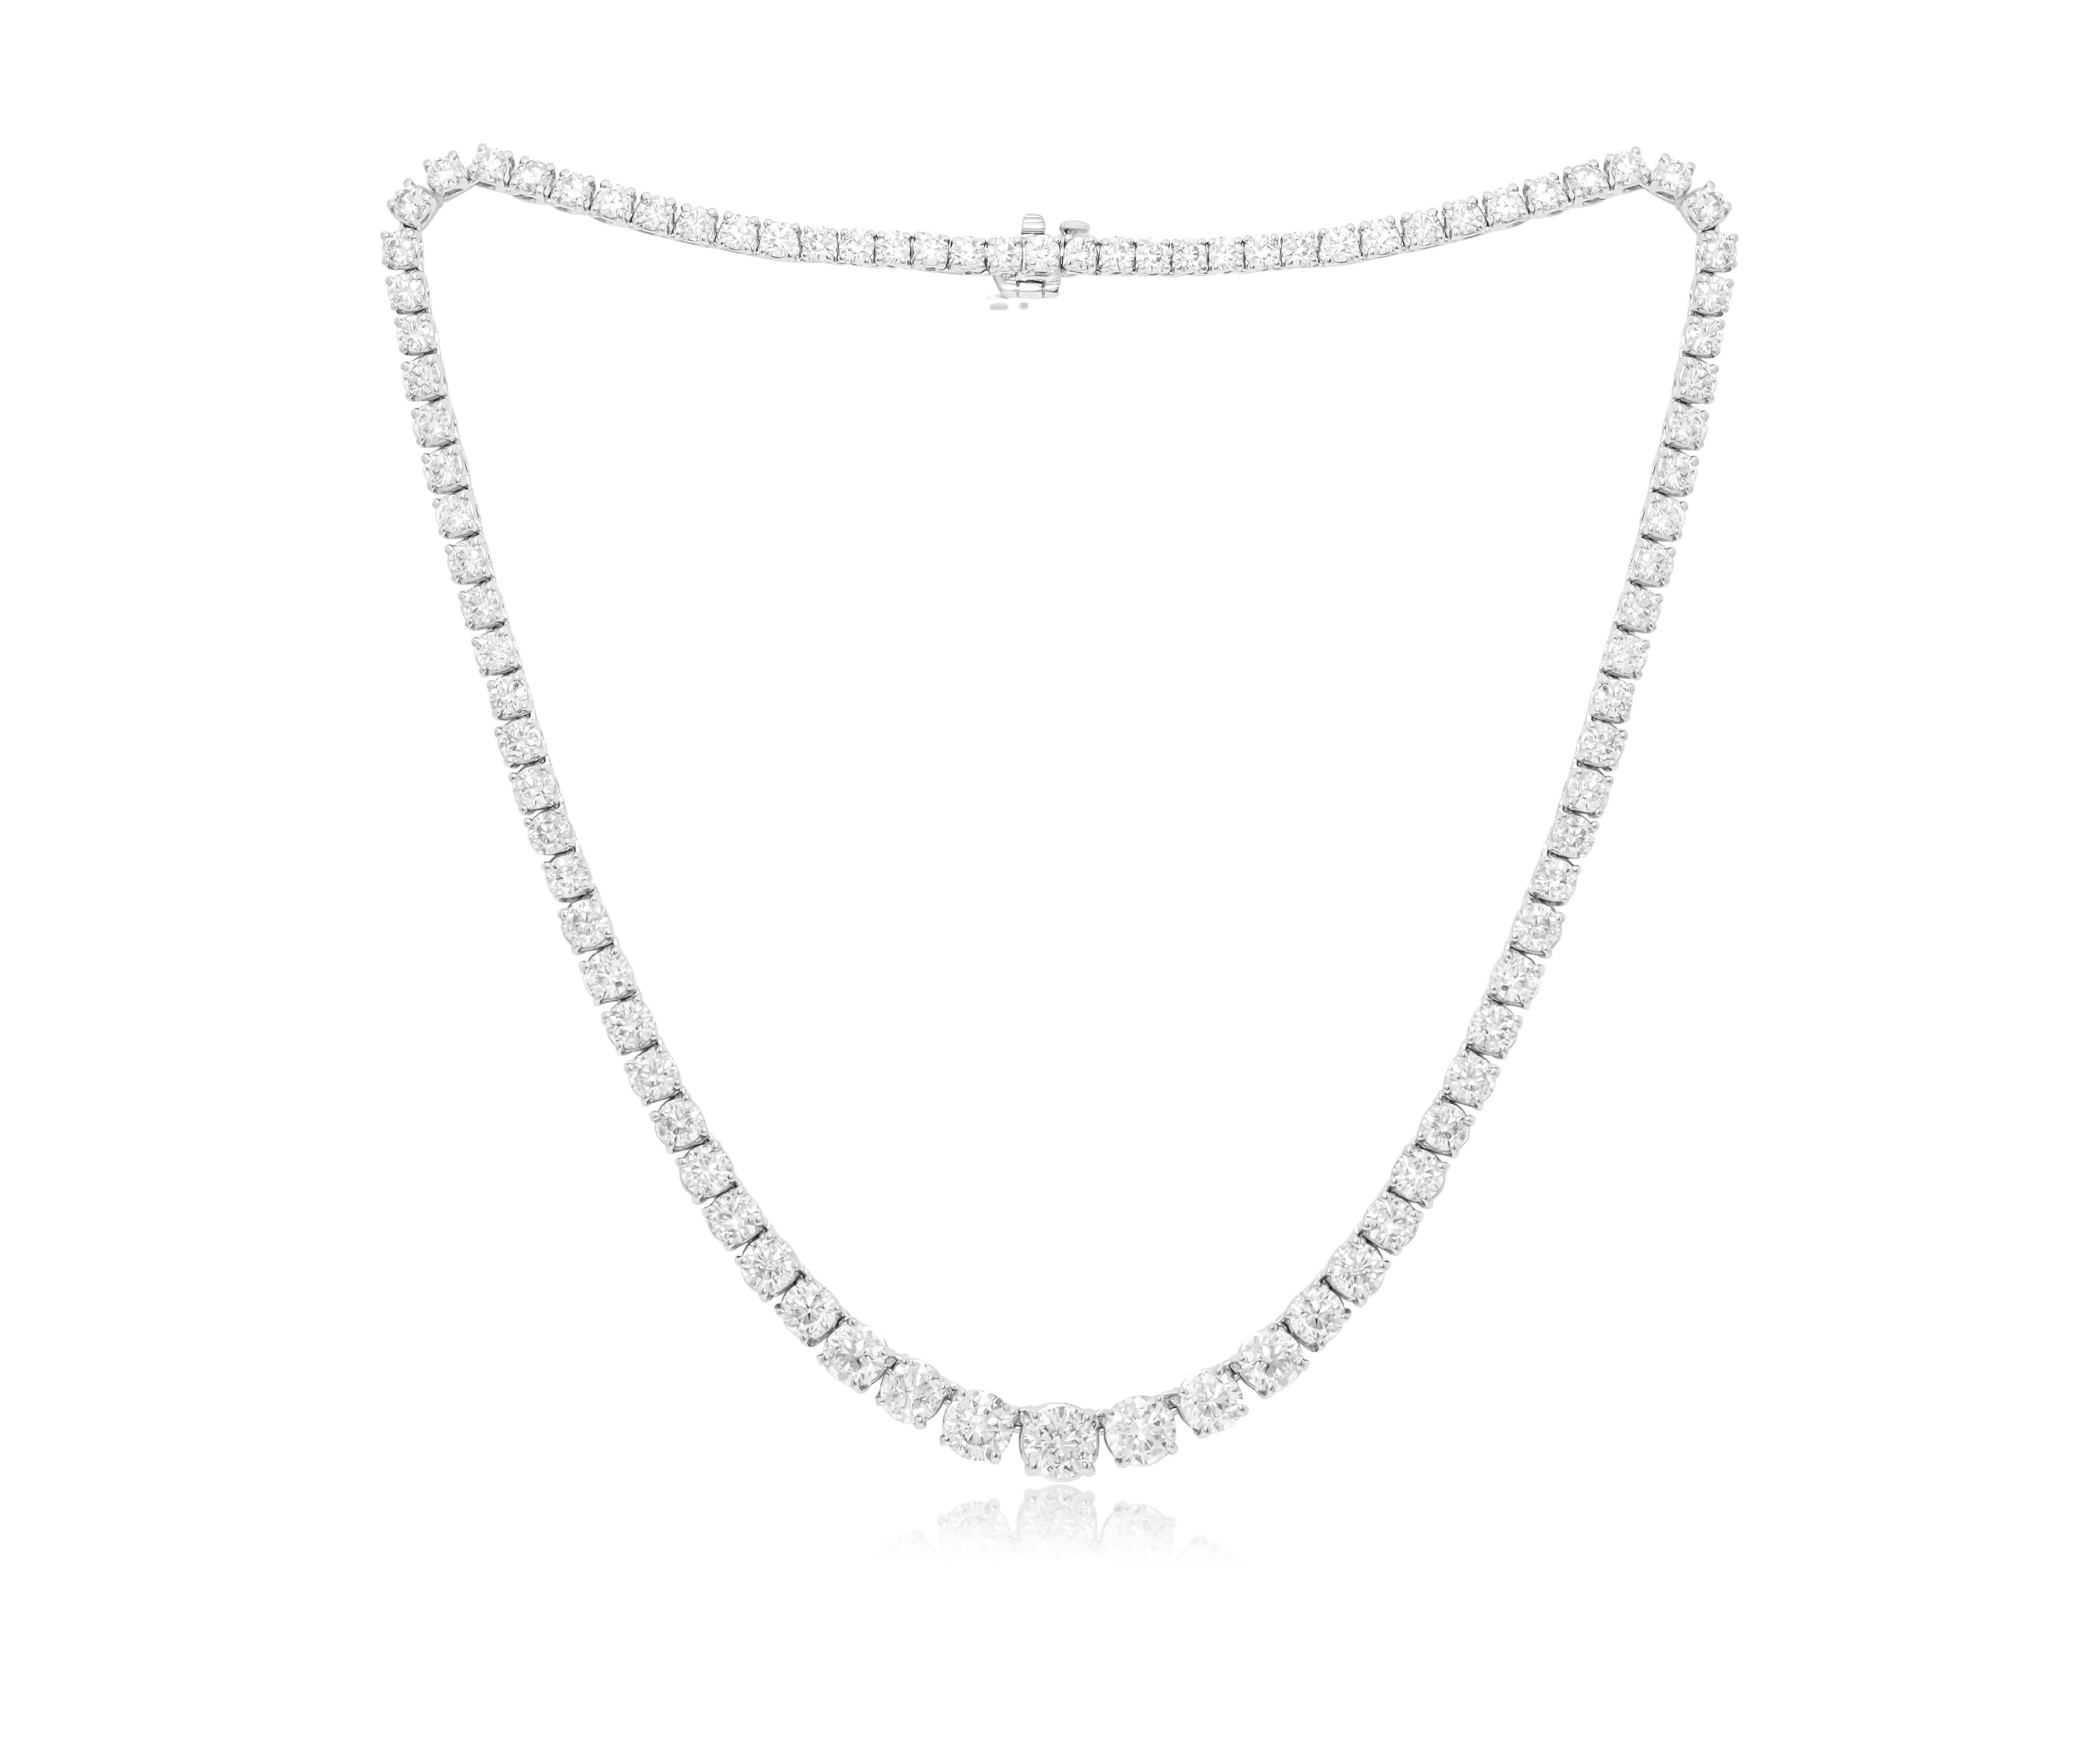 Cushion Cut Diana M. Custom 23.38 cts 4 Prong 18k White Gold Graduated  Tennis Necklace  For Sale